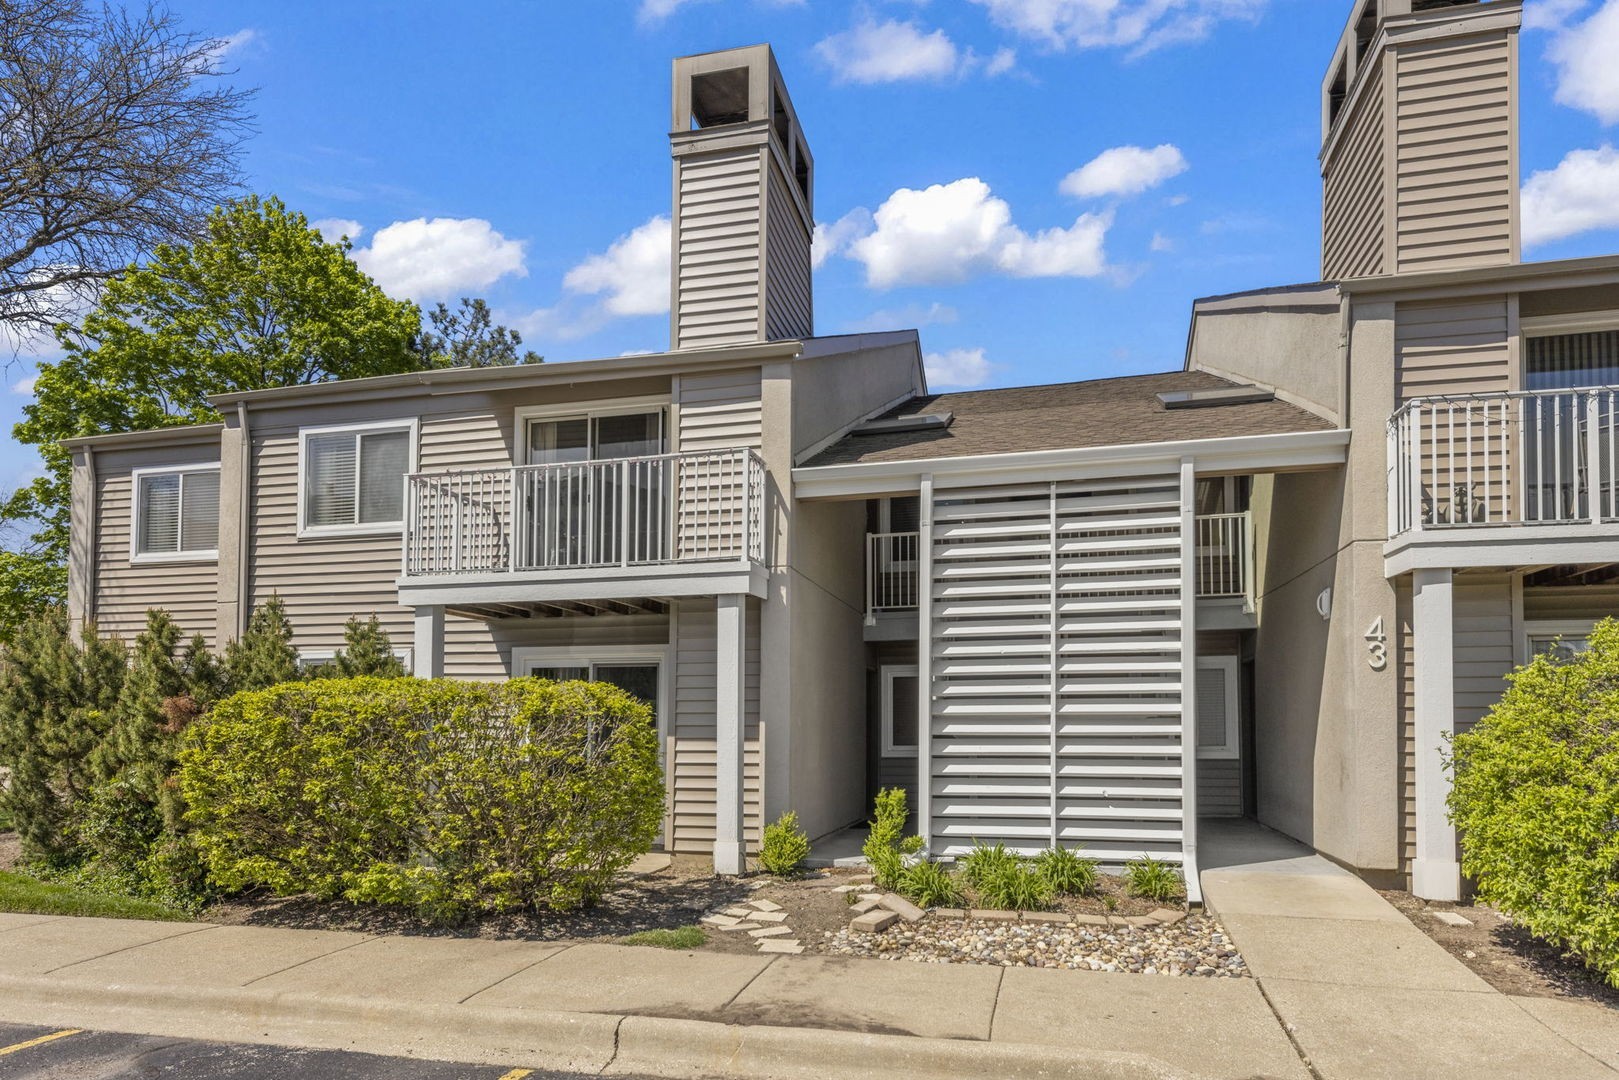 1. 43 Orchard Terrace